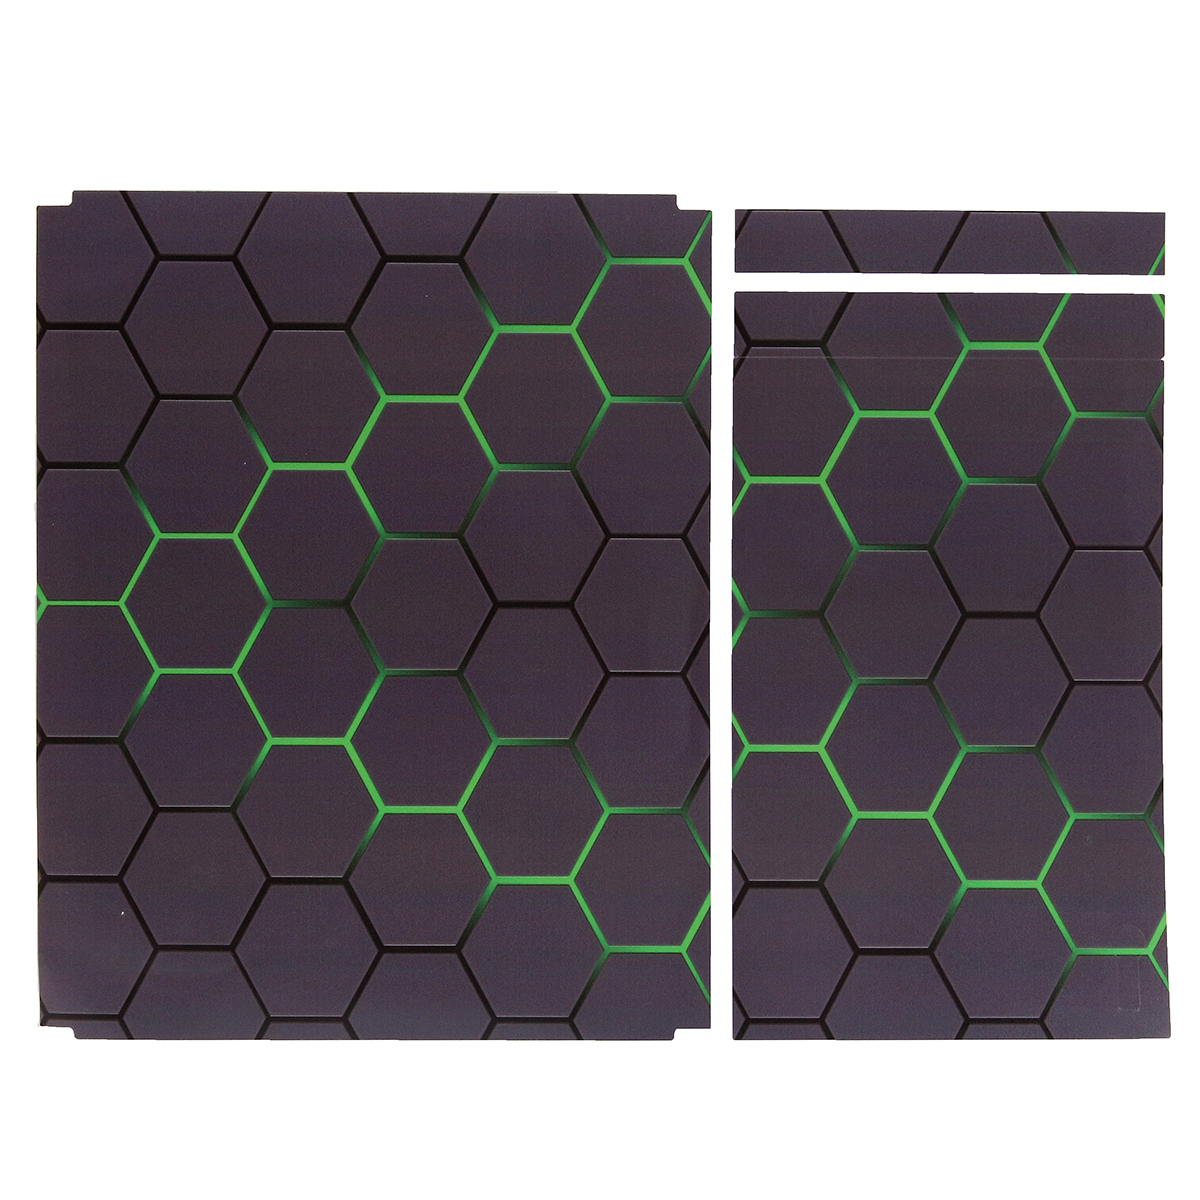 Green Grid Vinyl Decal Skin Stickers Cover for Xbox One S Game Console&2 Controllers 41